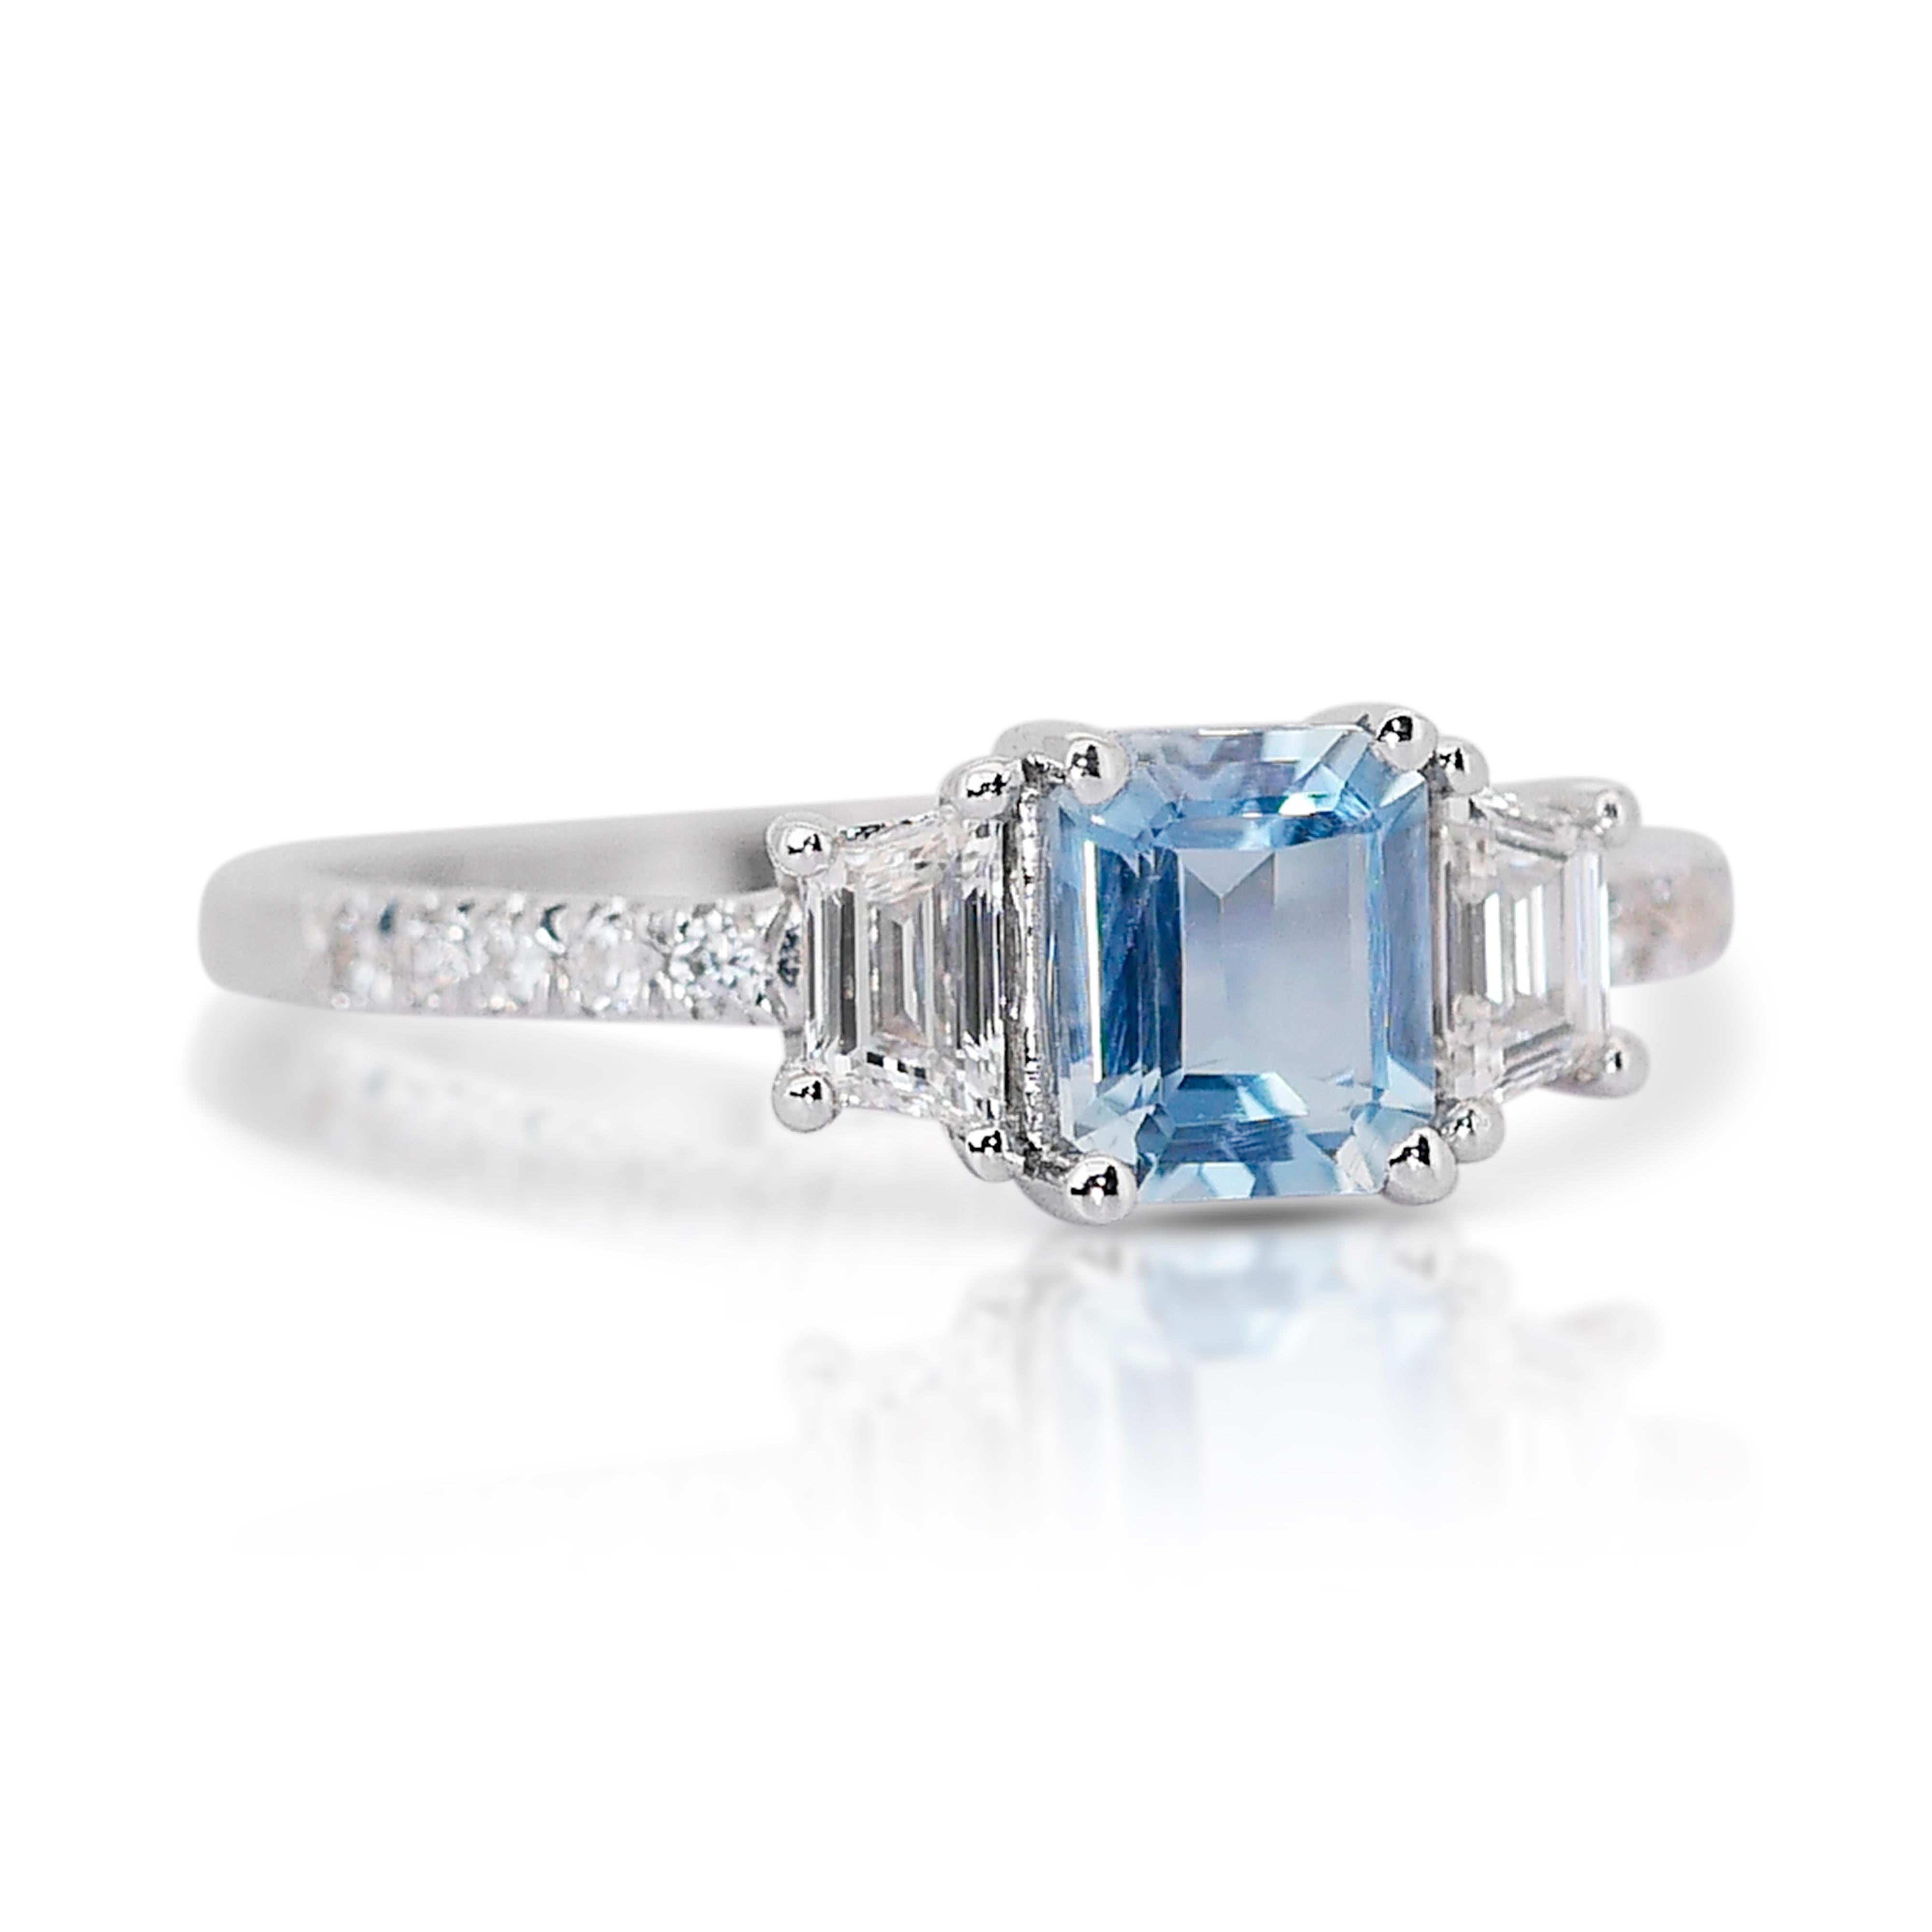 Elegant 1.28ct Aquamarine and Diamonds 3-Stone Ring in 18k White Gold - IGI Certified

This exquisite ring in 18k white gold showcases a breathtaking 0.80-carat emerald-cut aquamarine as its centerpiece. Surrounding the main stone are 2